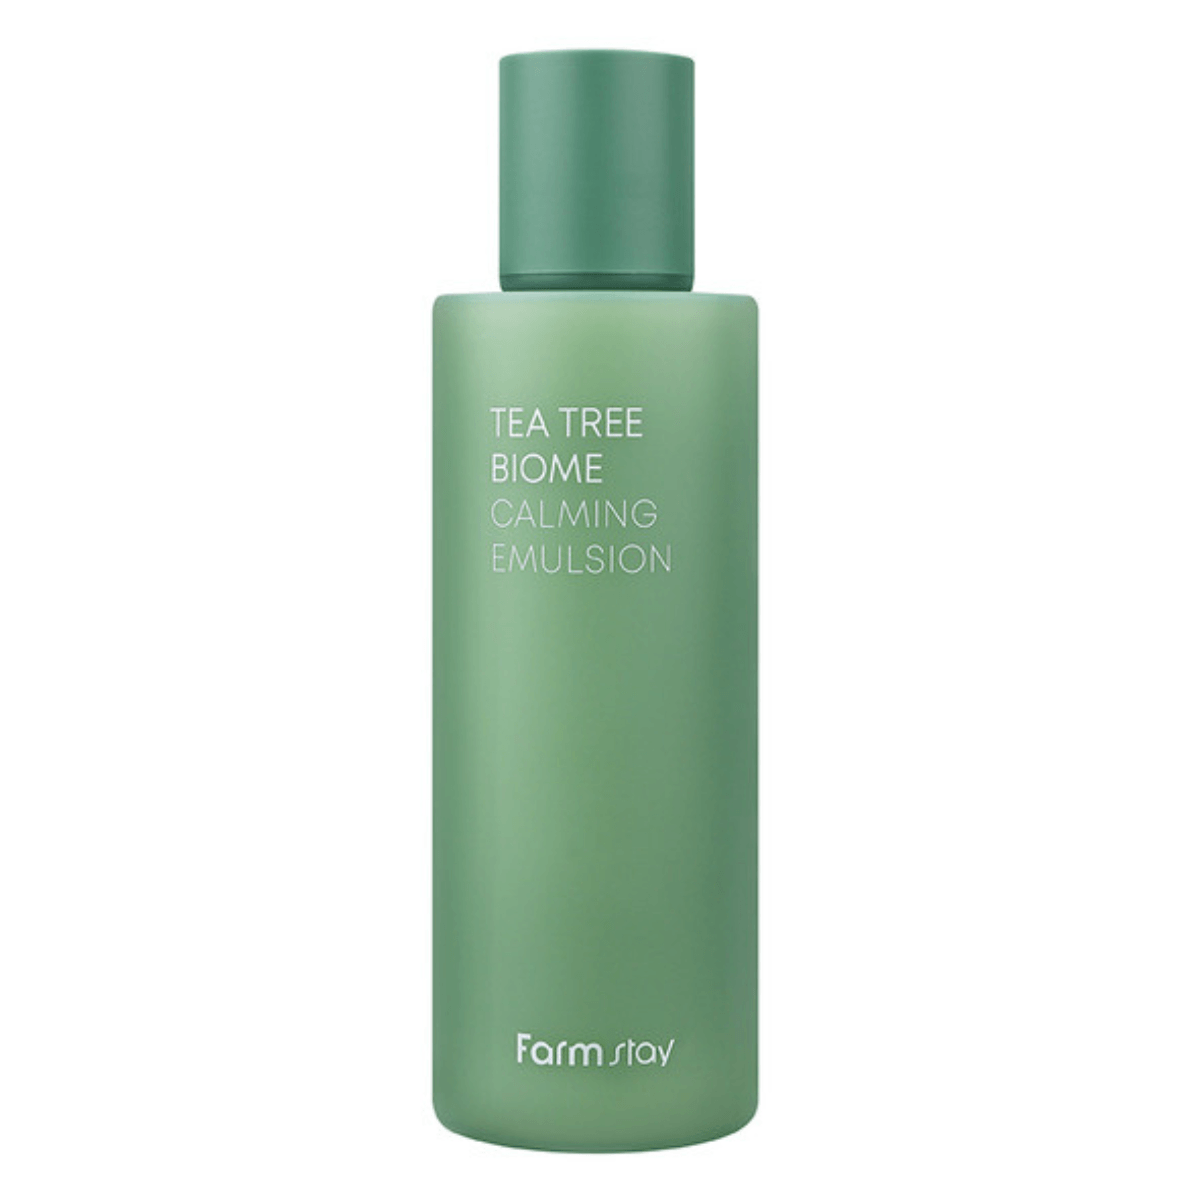 Farmstay Tea Tree Biome Calming Emulsion: Hydrates, soothes, and controls sebum. With tea tree biome for healthy skin balance